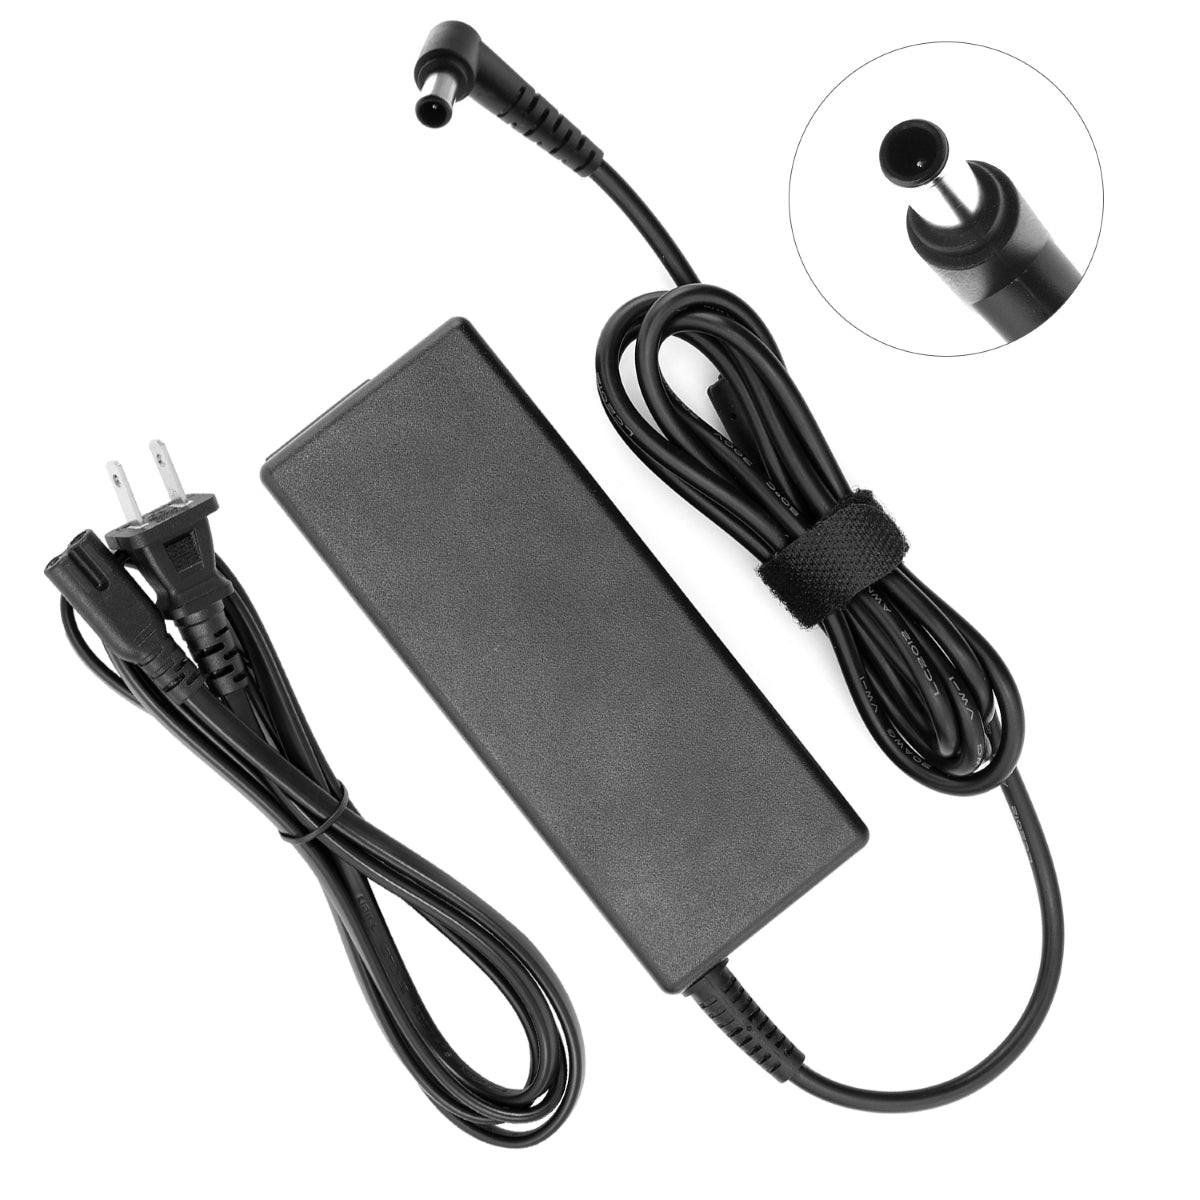 Compatible Charger for Sony Vaio VGN-FZ340E